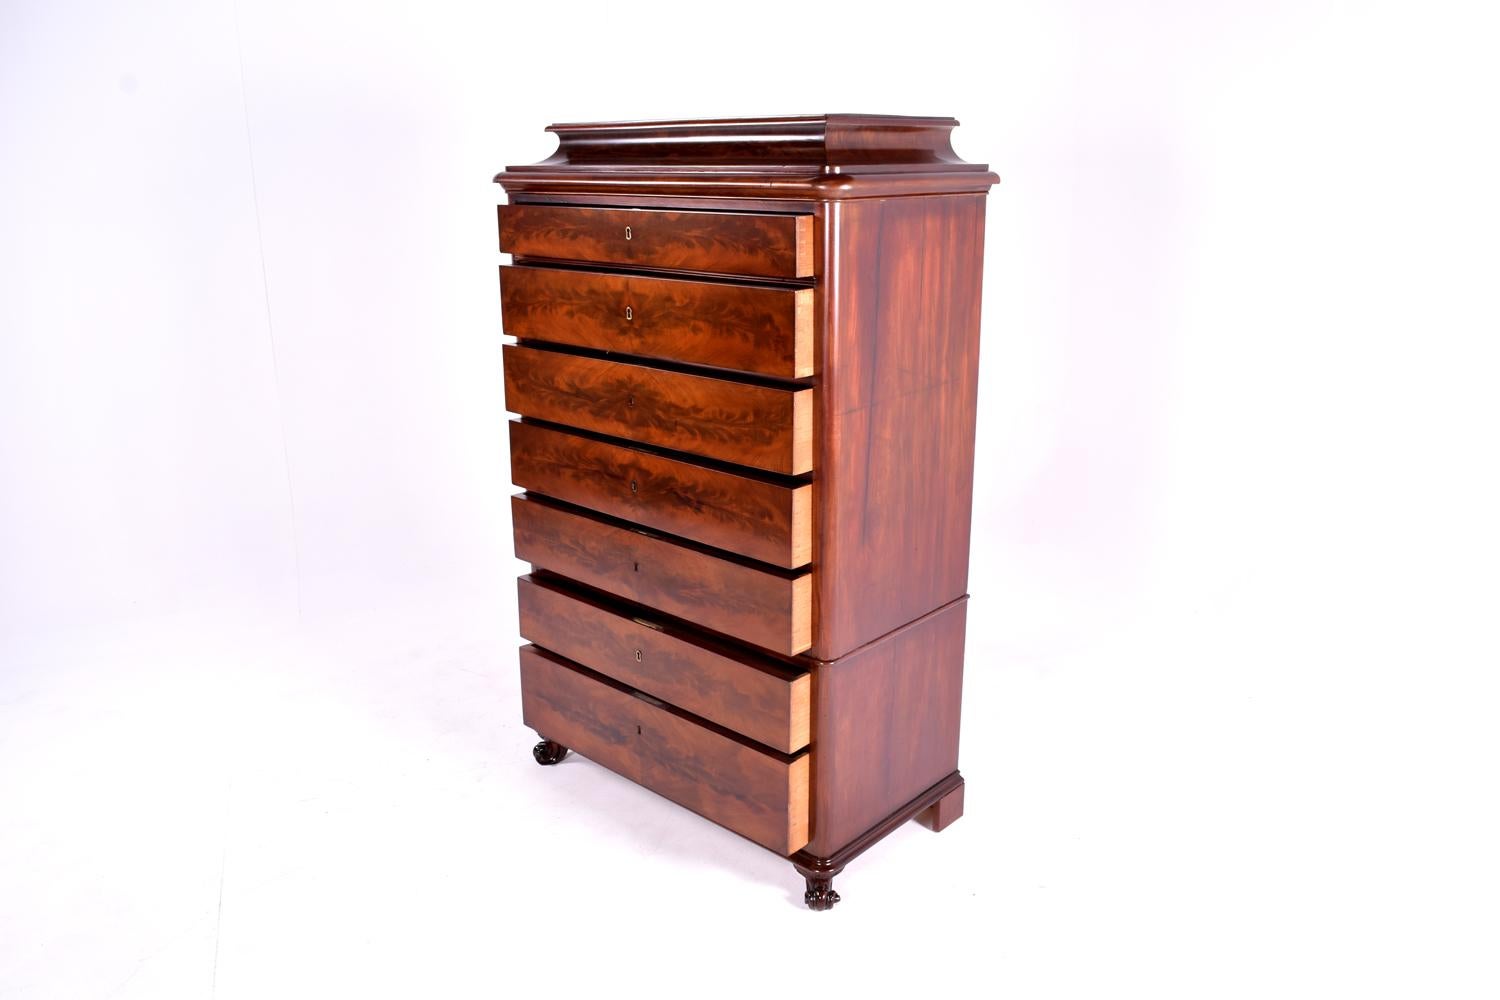 Danish Mid-19th Century Biedermeier Commode Tall Chest of Drawers 7